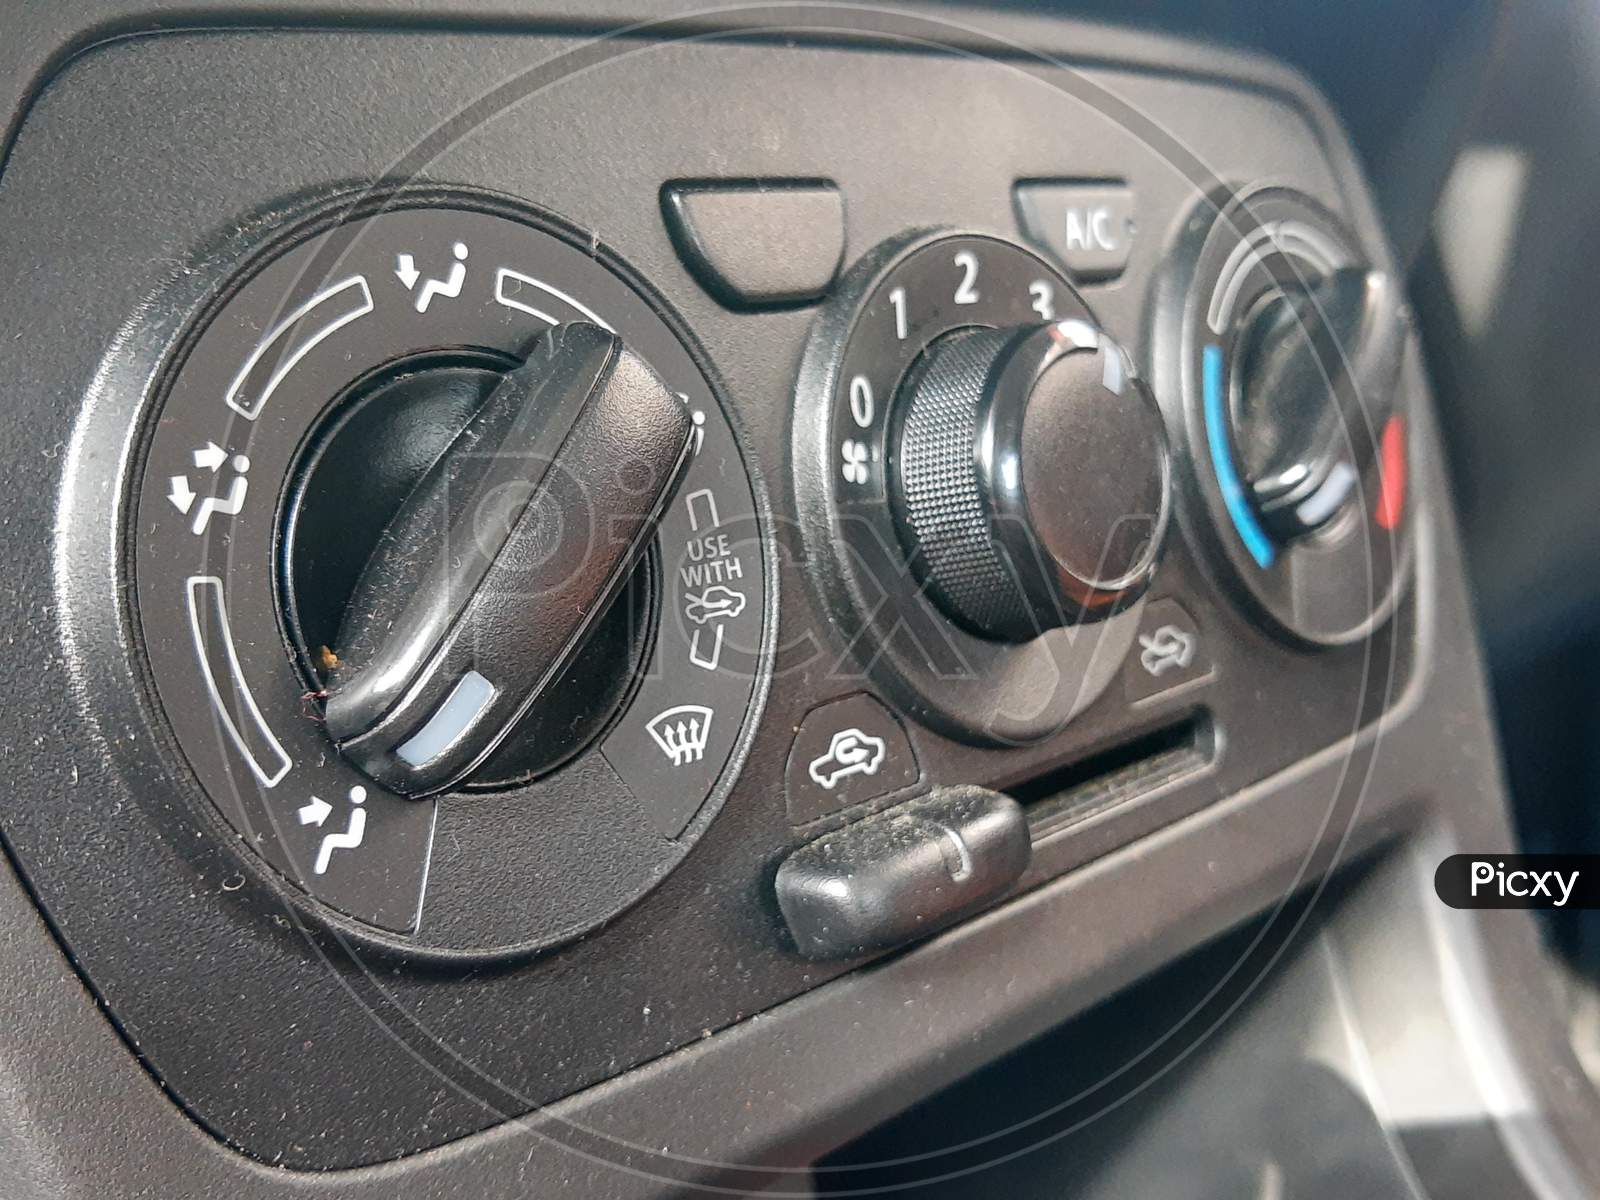 Details And Controls Of Modern Car - Close Up Instrument Automobile Panel With Climat Control View With Air Conditioning Buttons